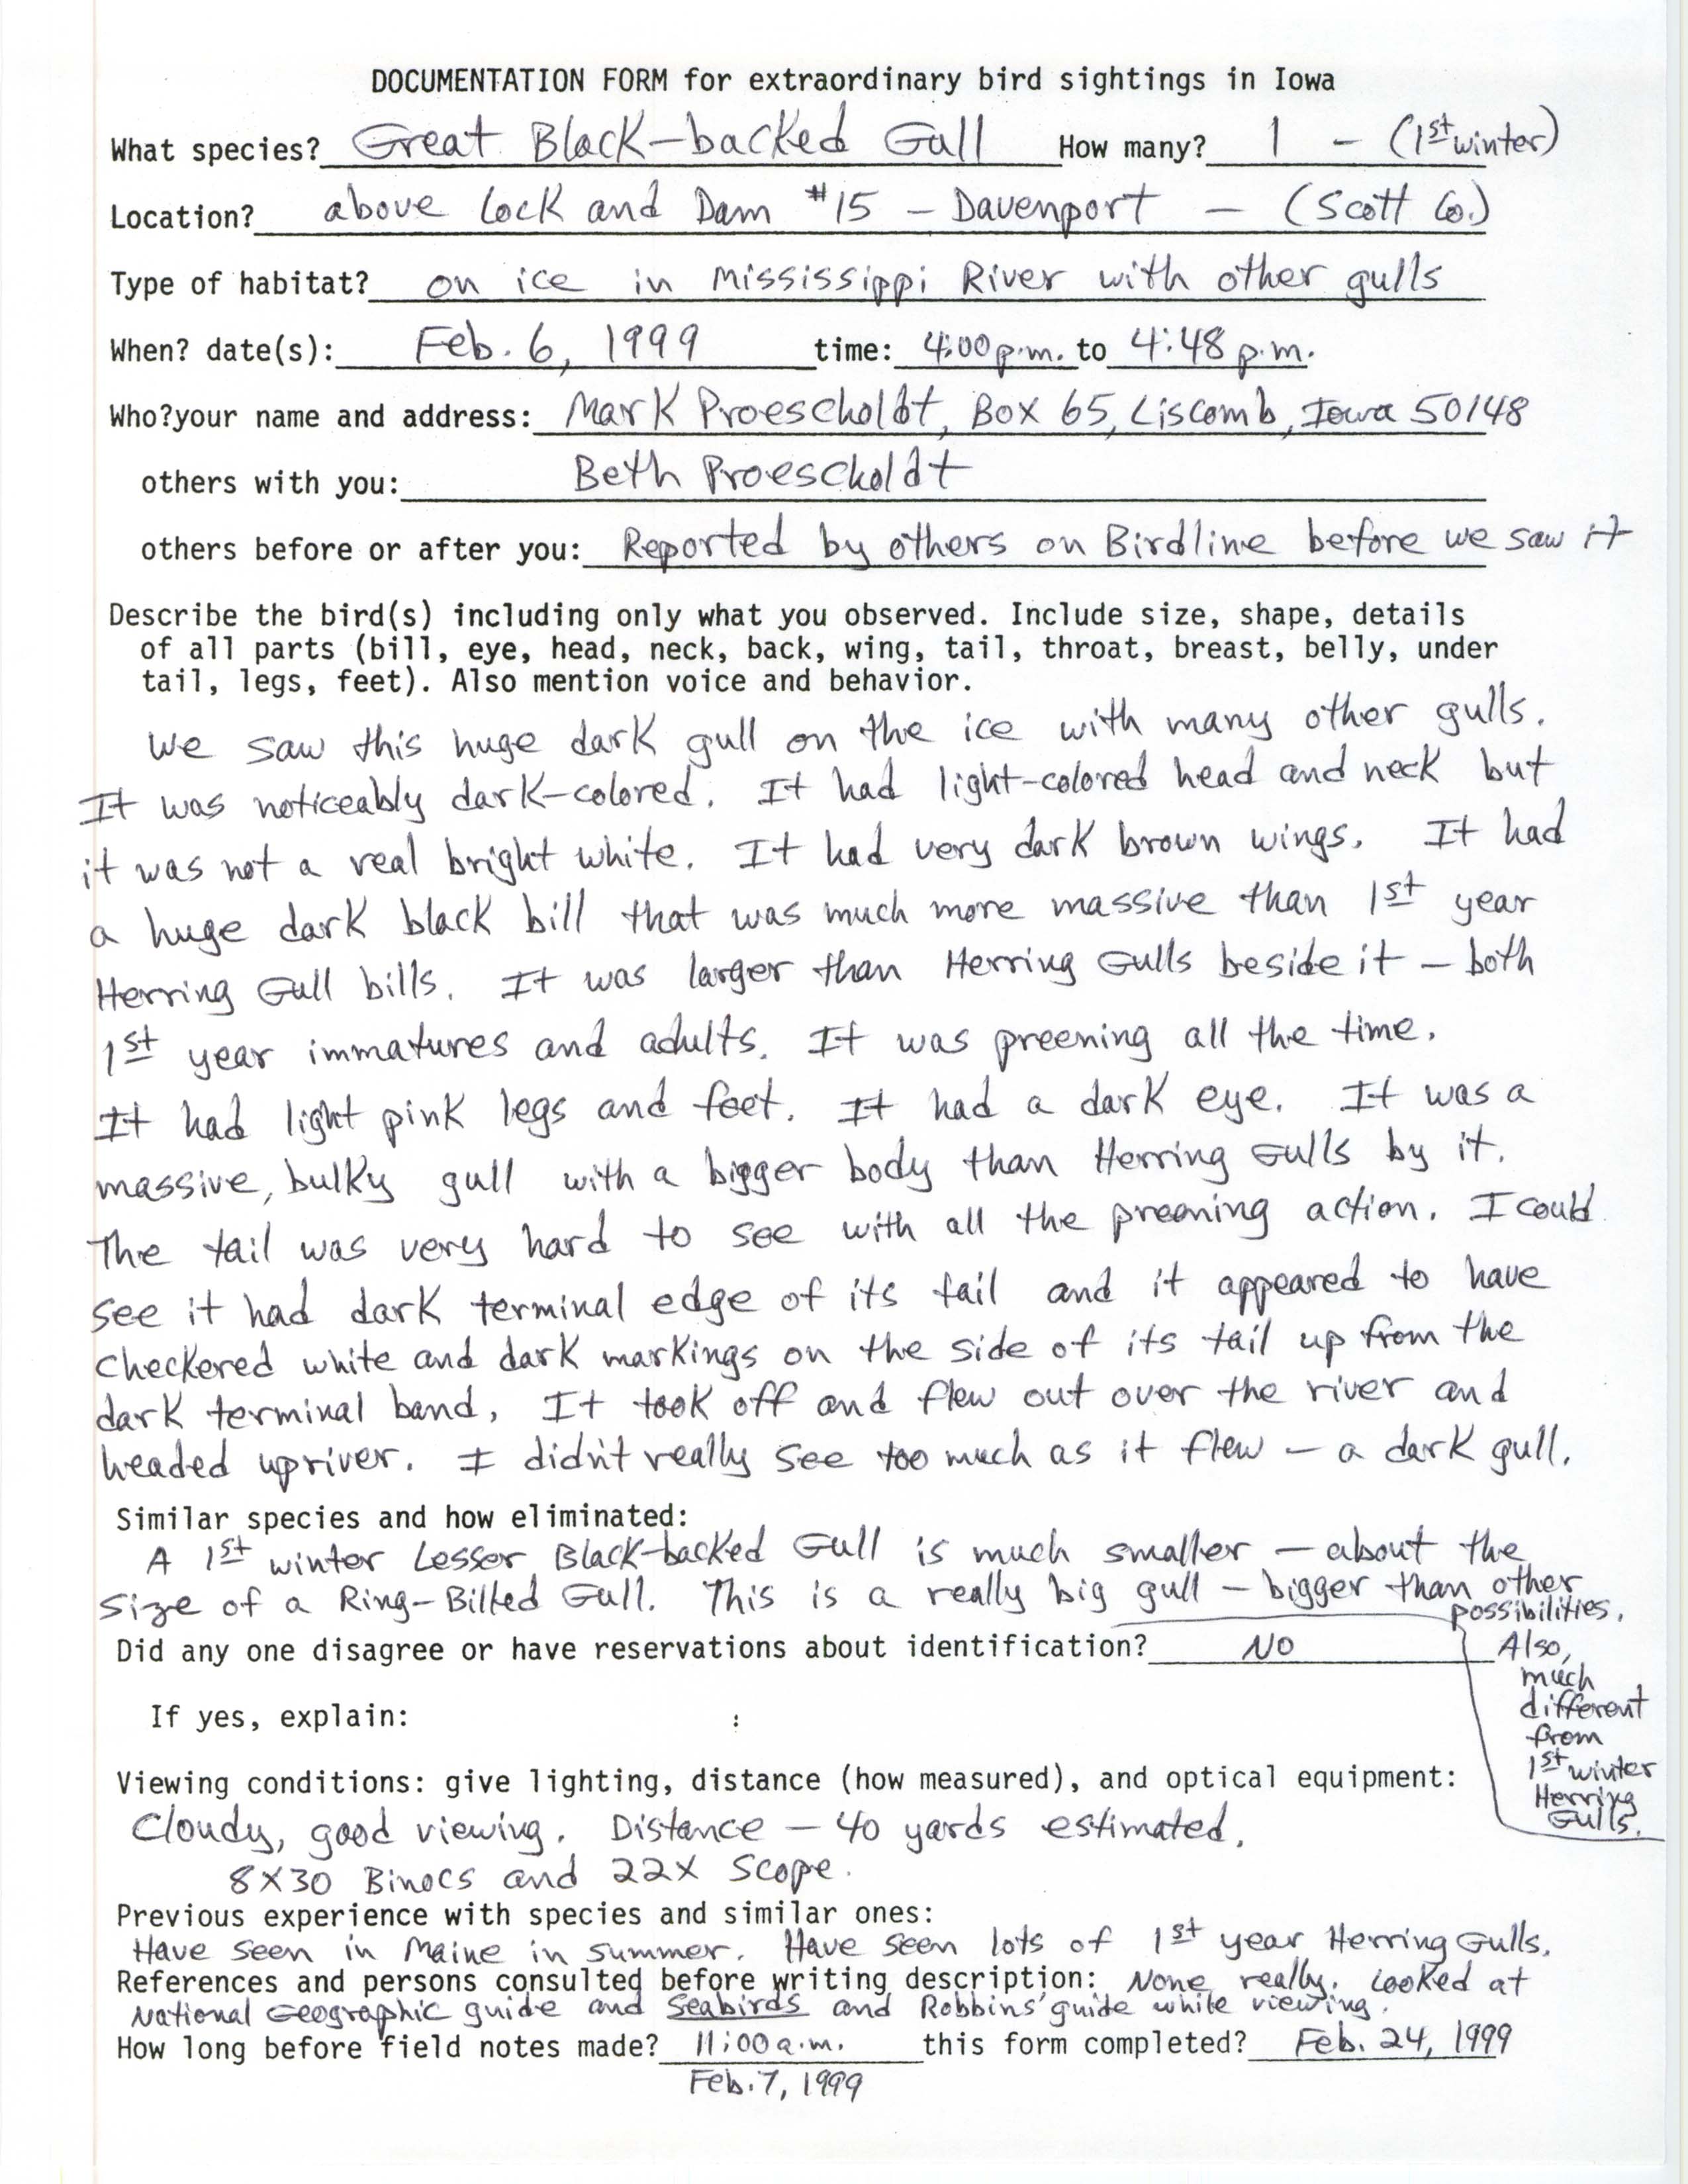 Rare bird documentation form for Great Black-backed Gull at Lock and Dam 15, 1999